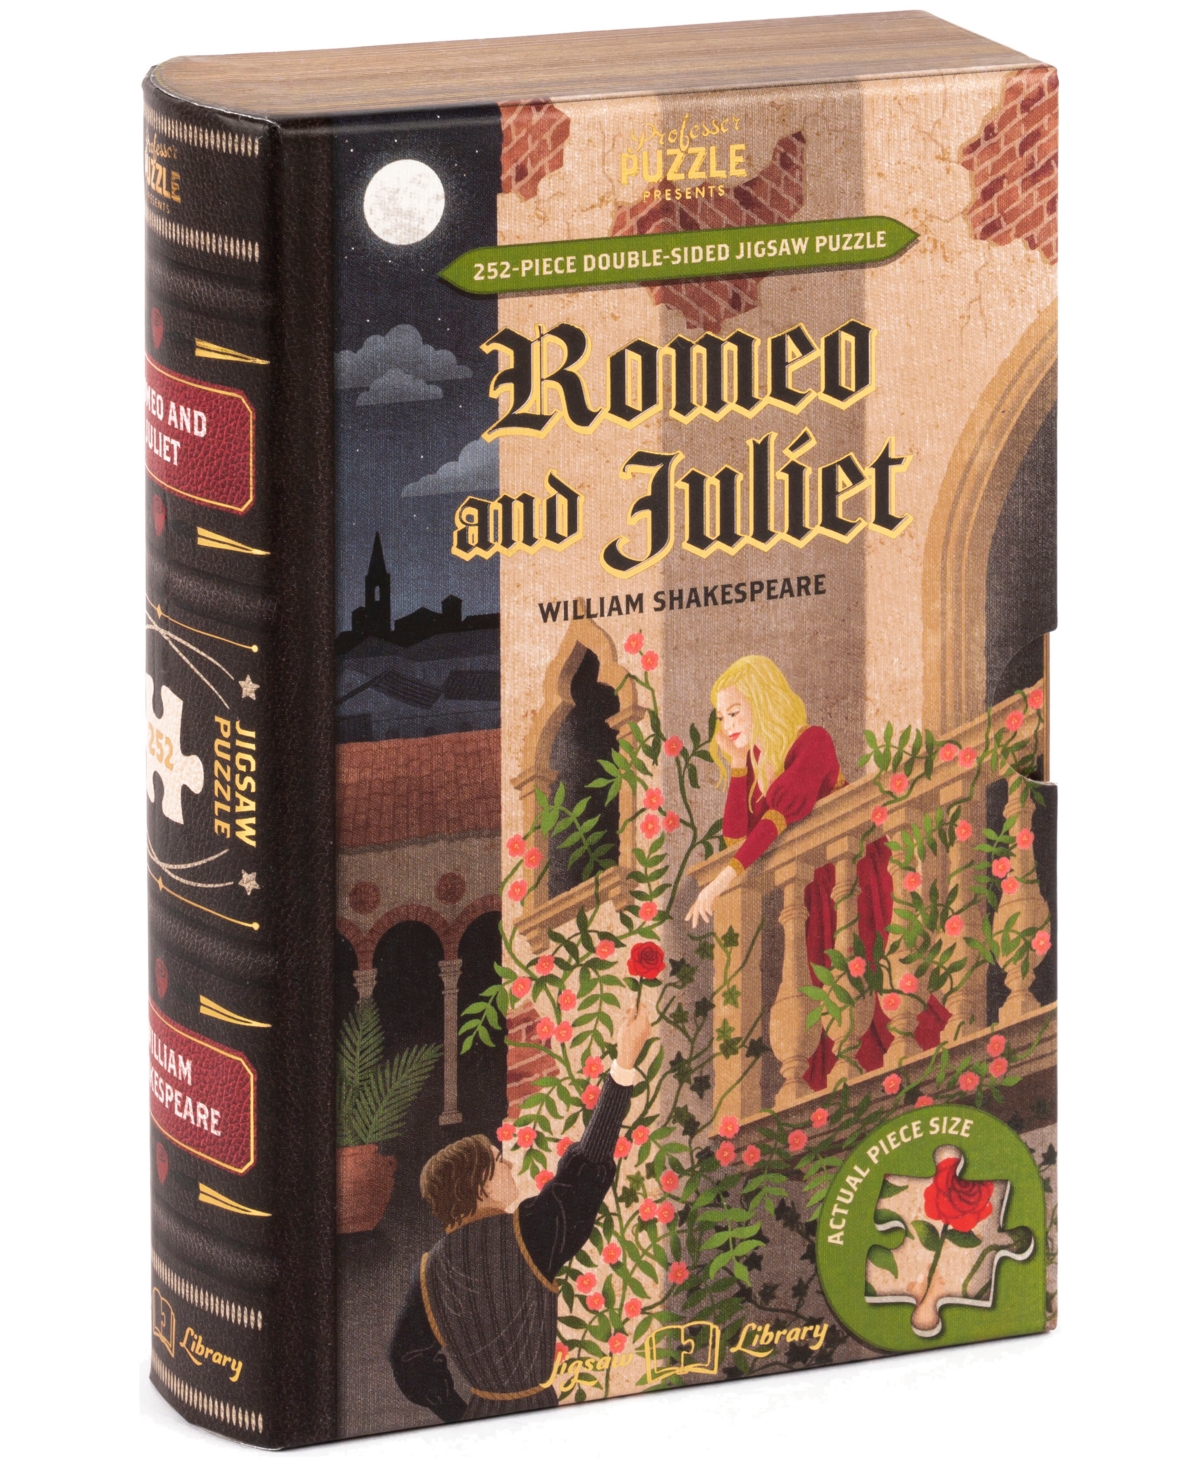 Professor Puzzle Kids' William Shakespeare's Romeo And Juliet Double-sided Jigsaw Puzzle Set, 252 Pieces In Multi Color